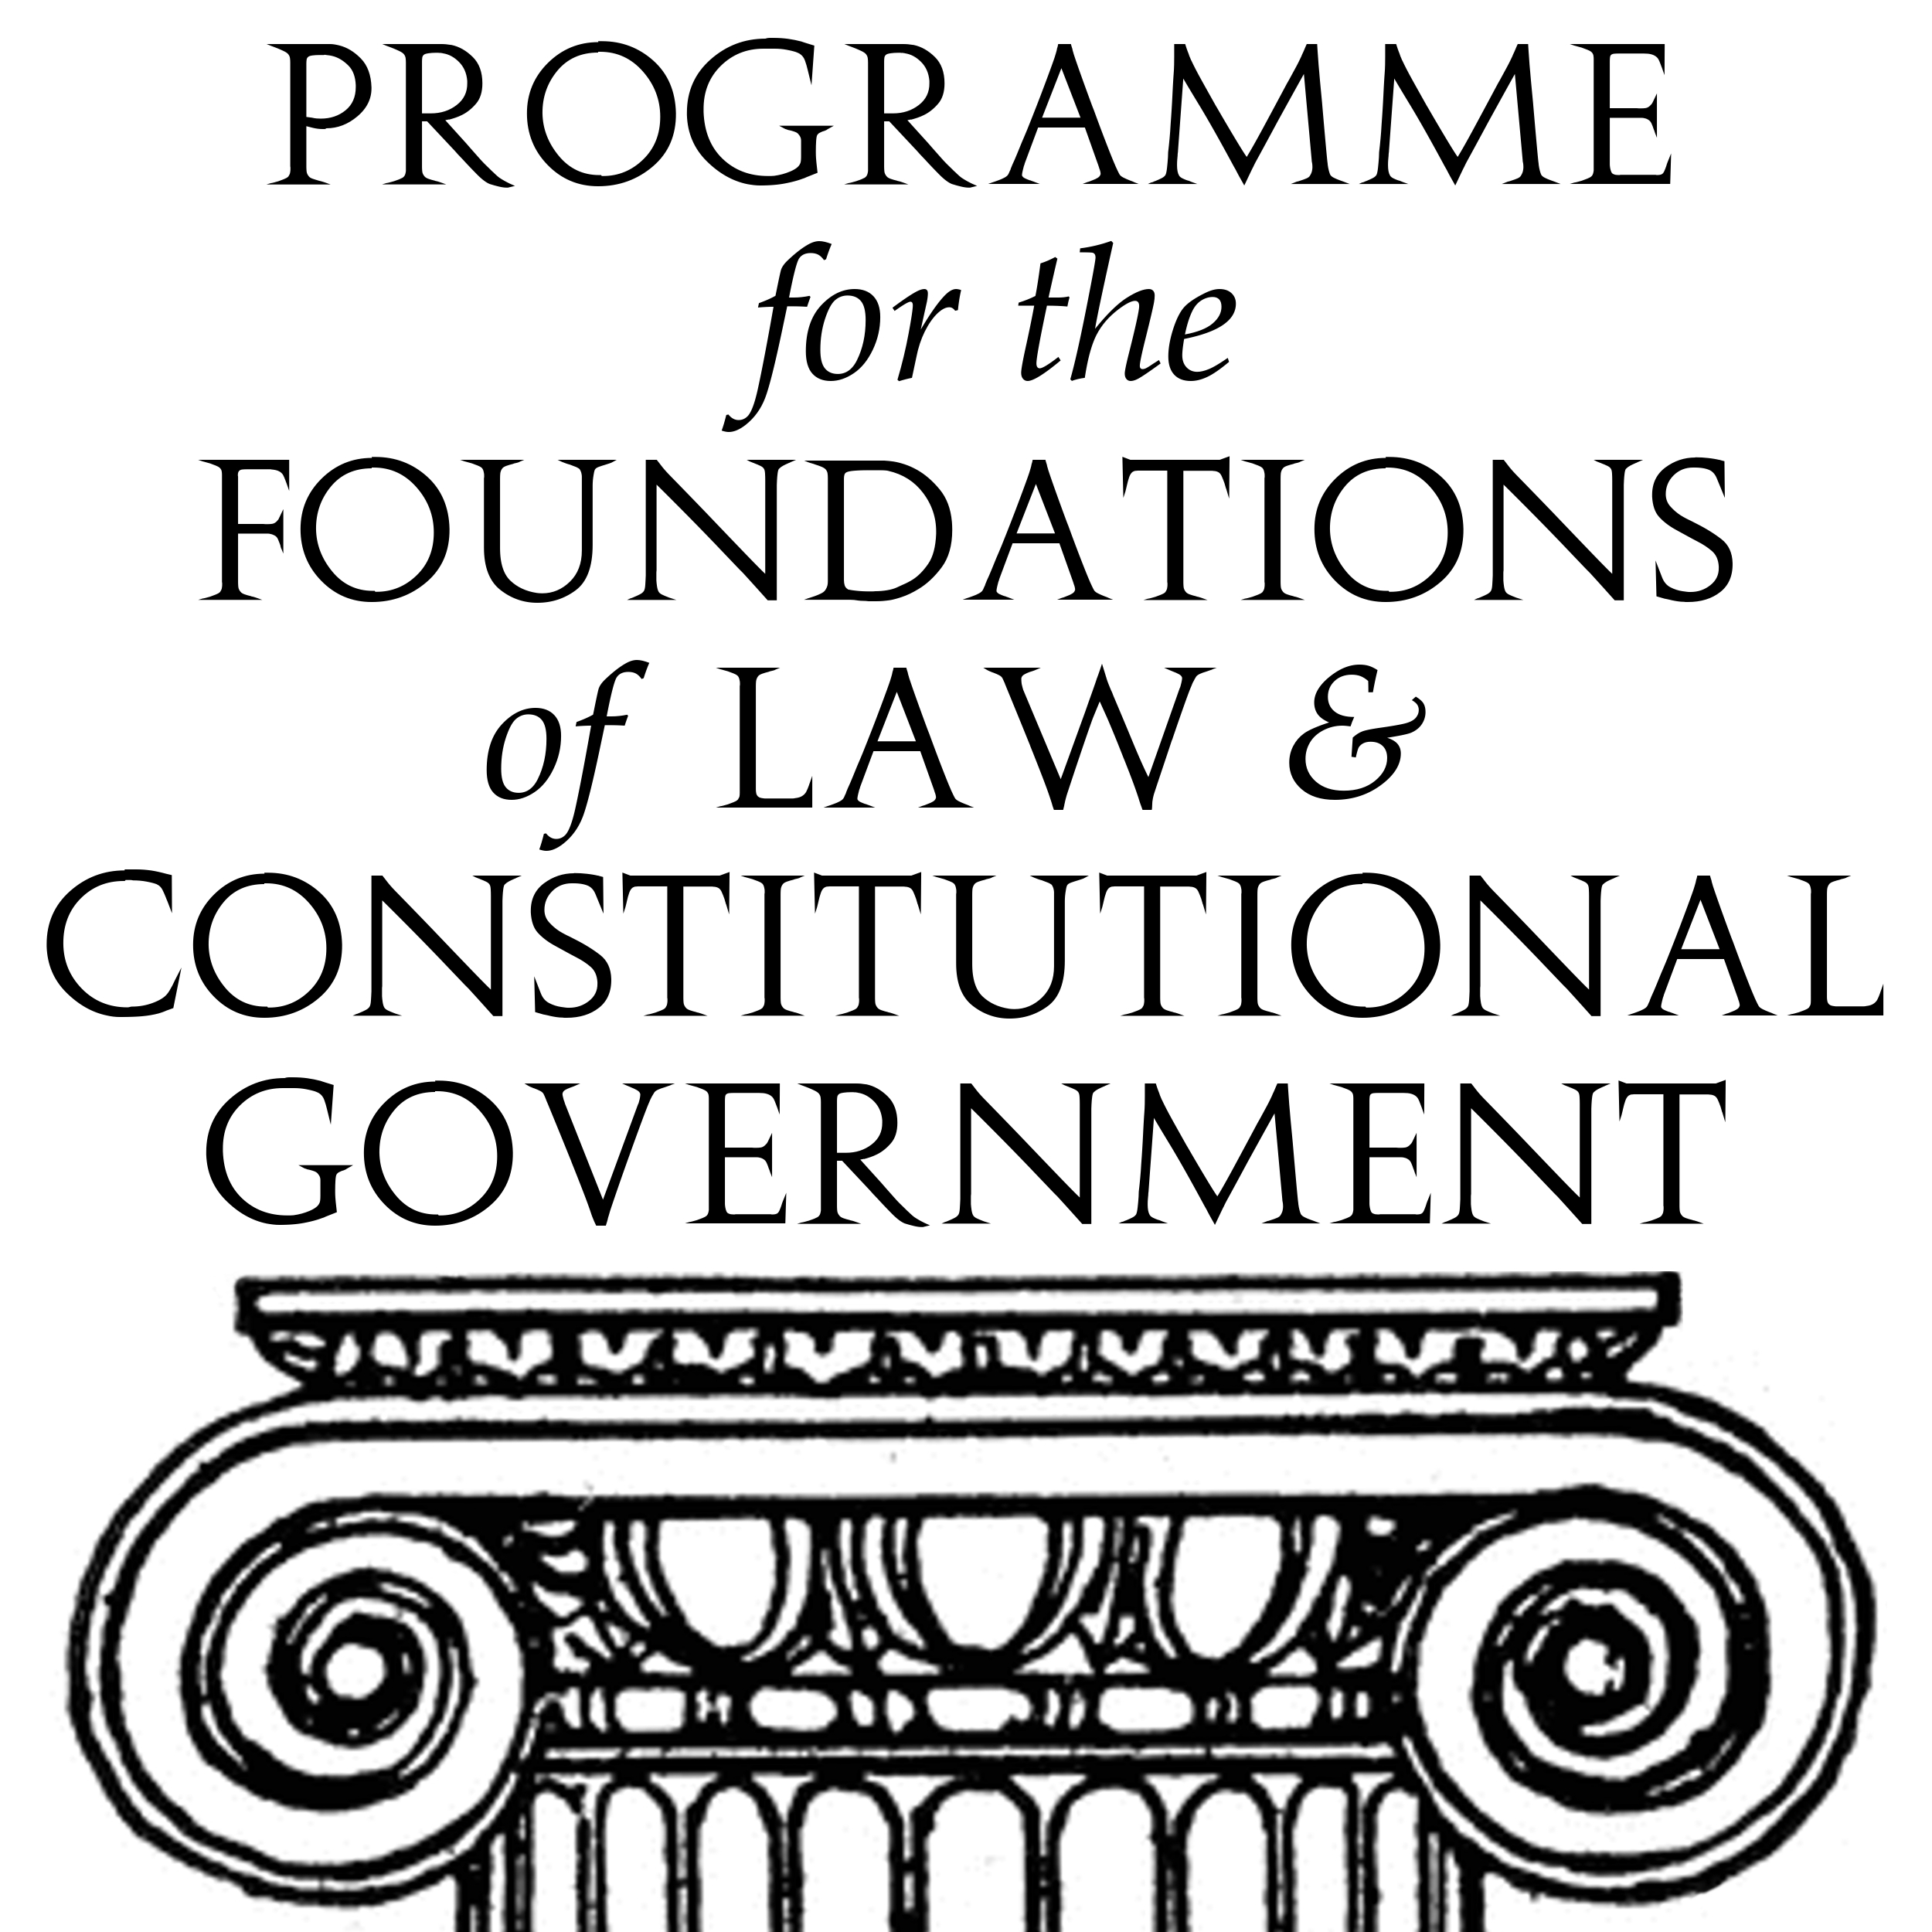 Programme for the Foundations of Law & Constitutional Government